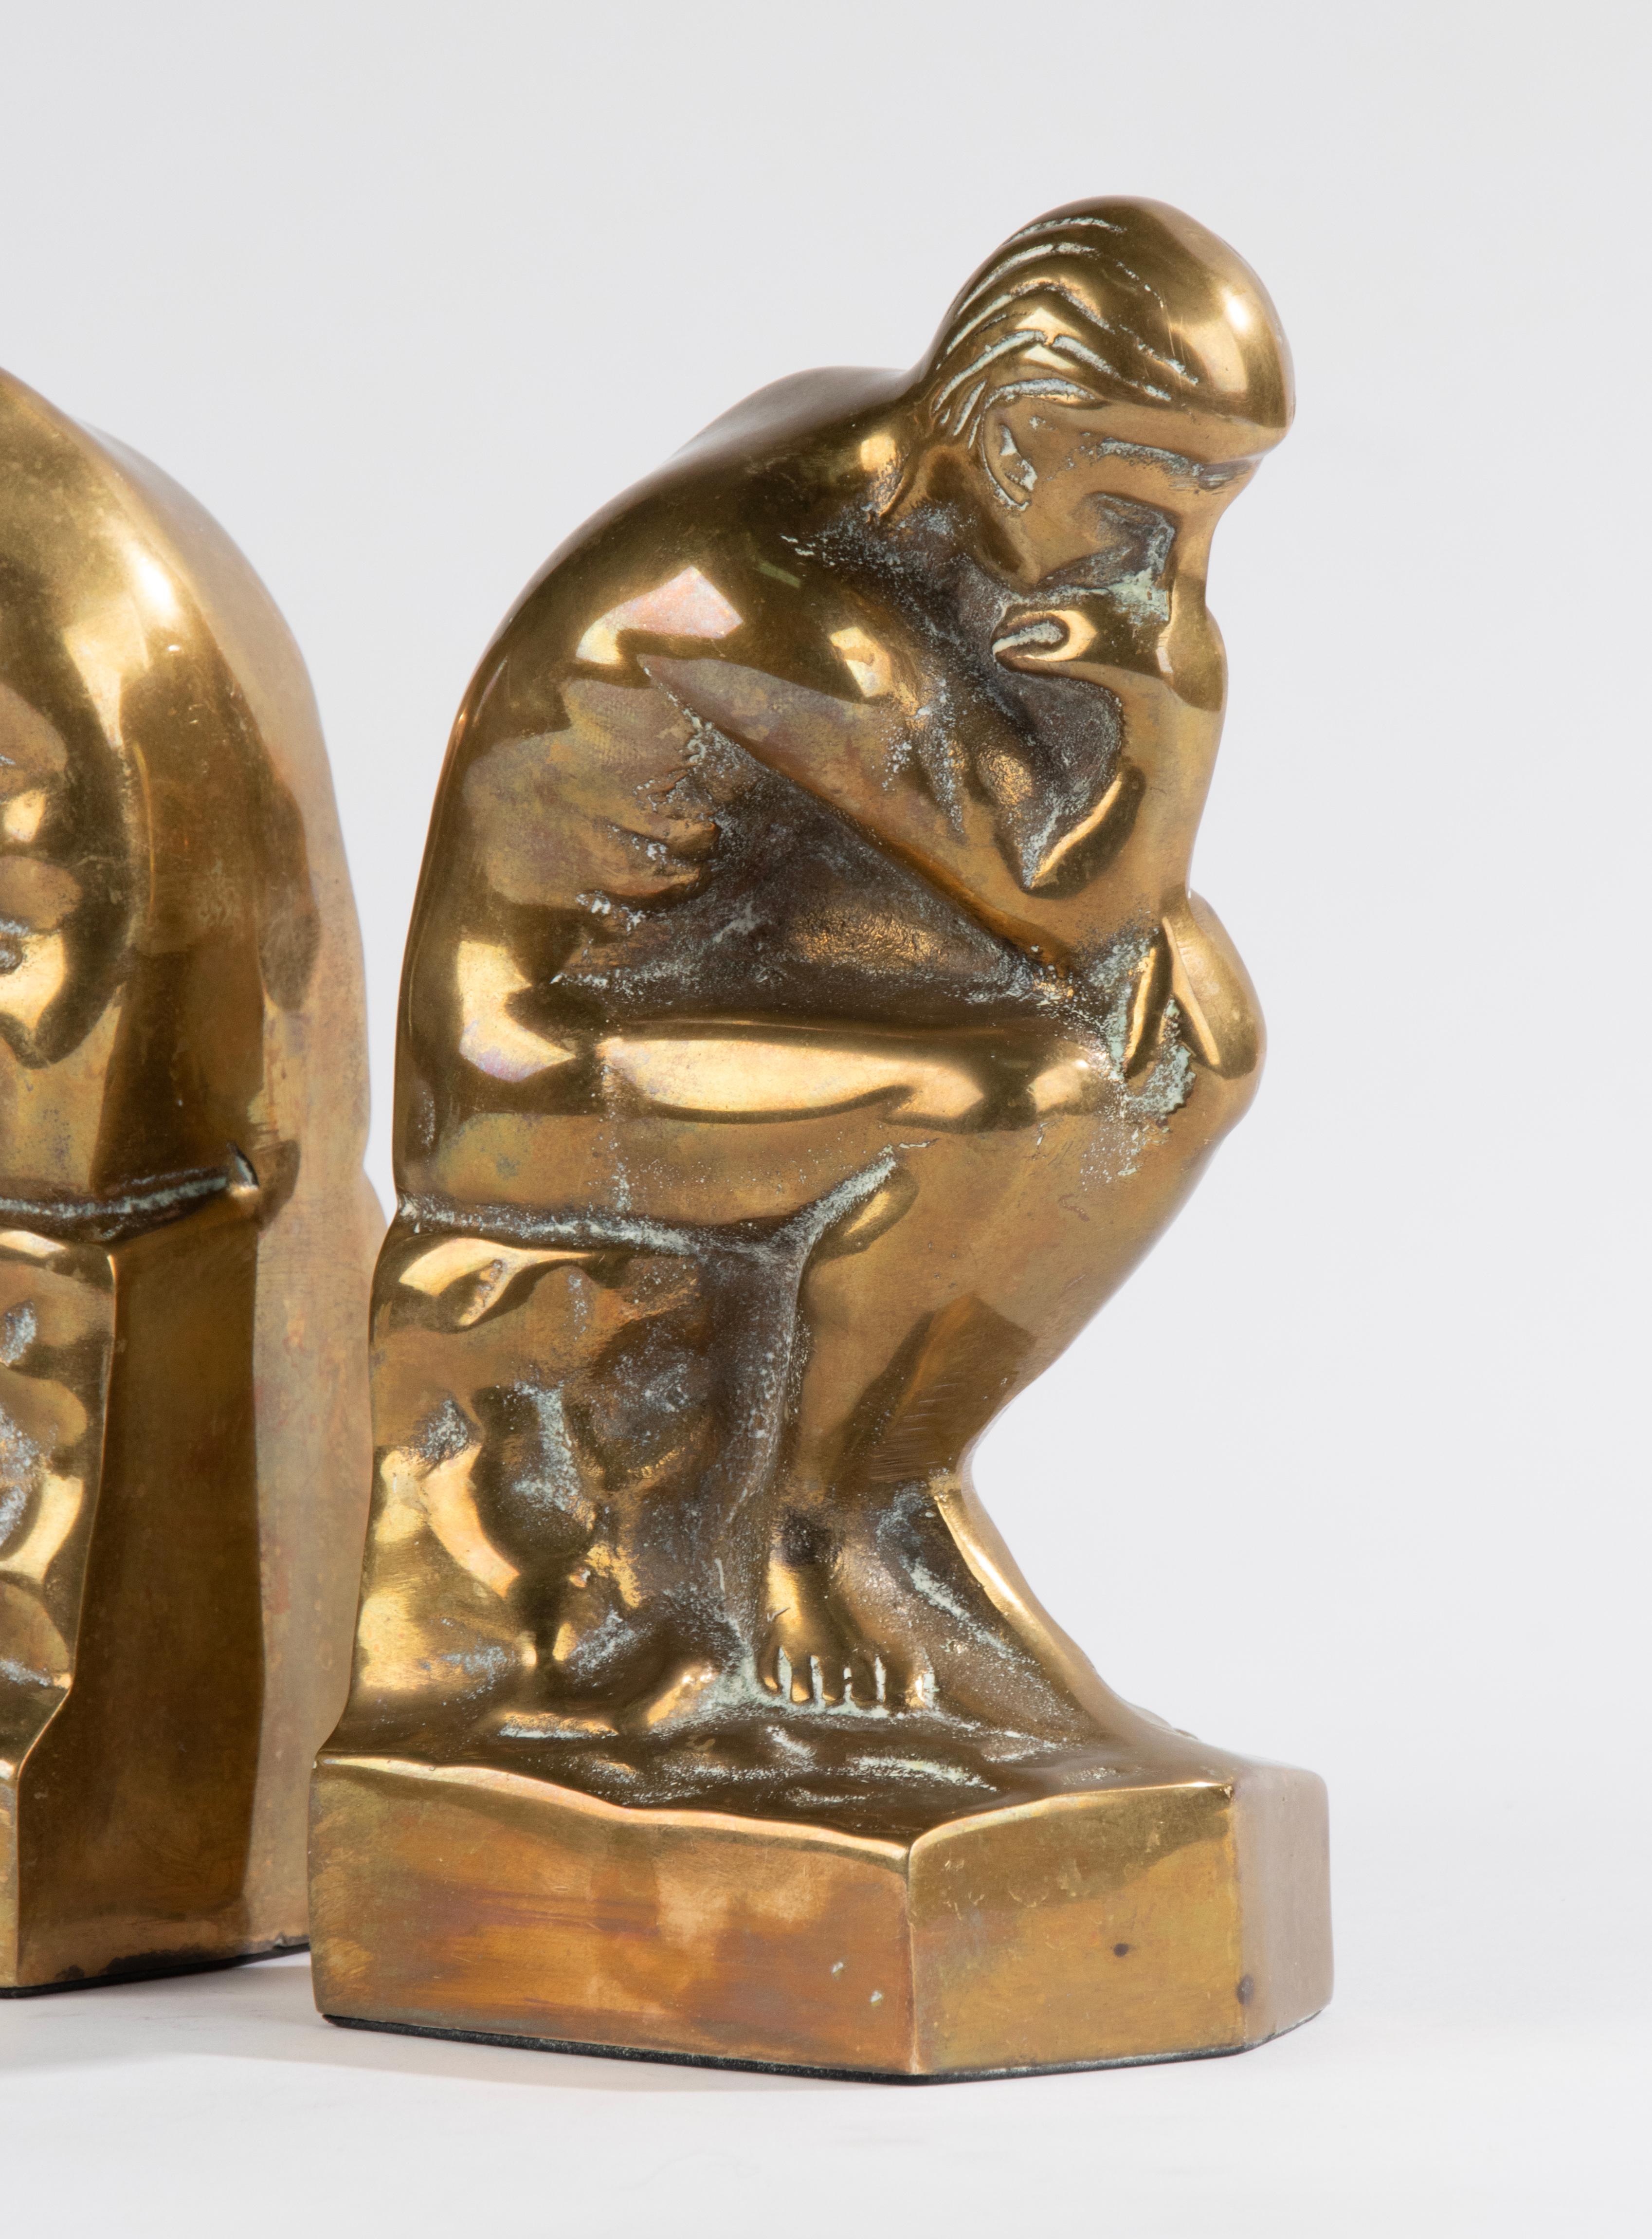 Italian Mid-20th Century Brass Bookends Inspired by 'the Thinker' from Auguste Rodin For Sale